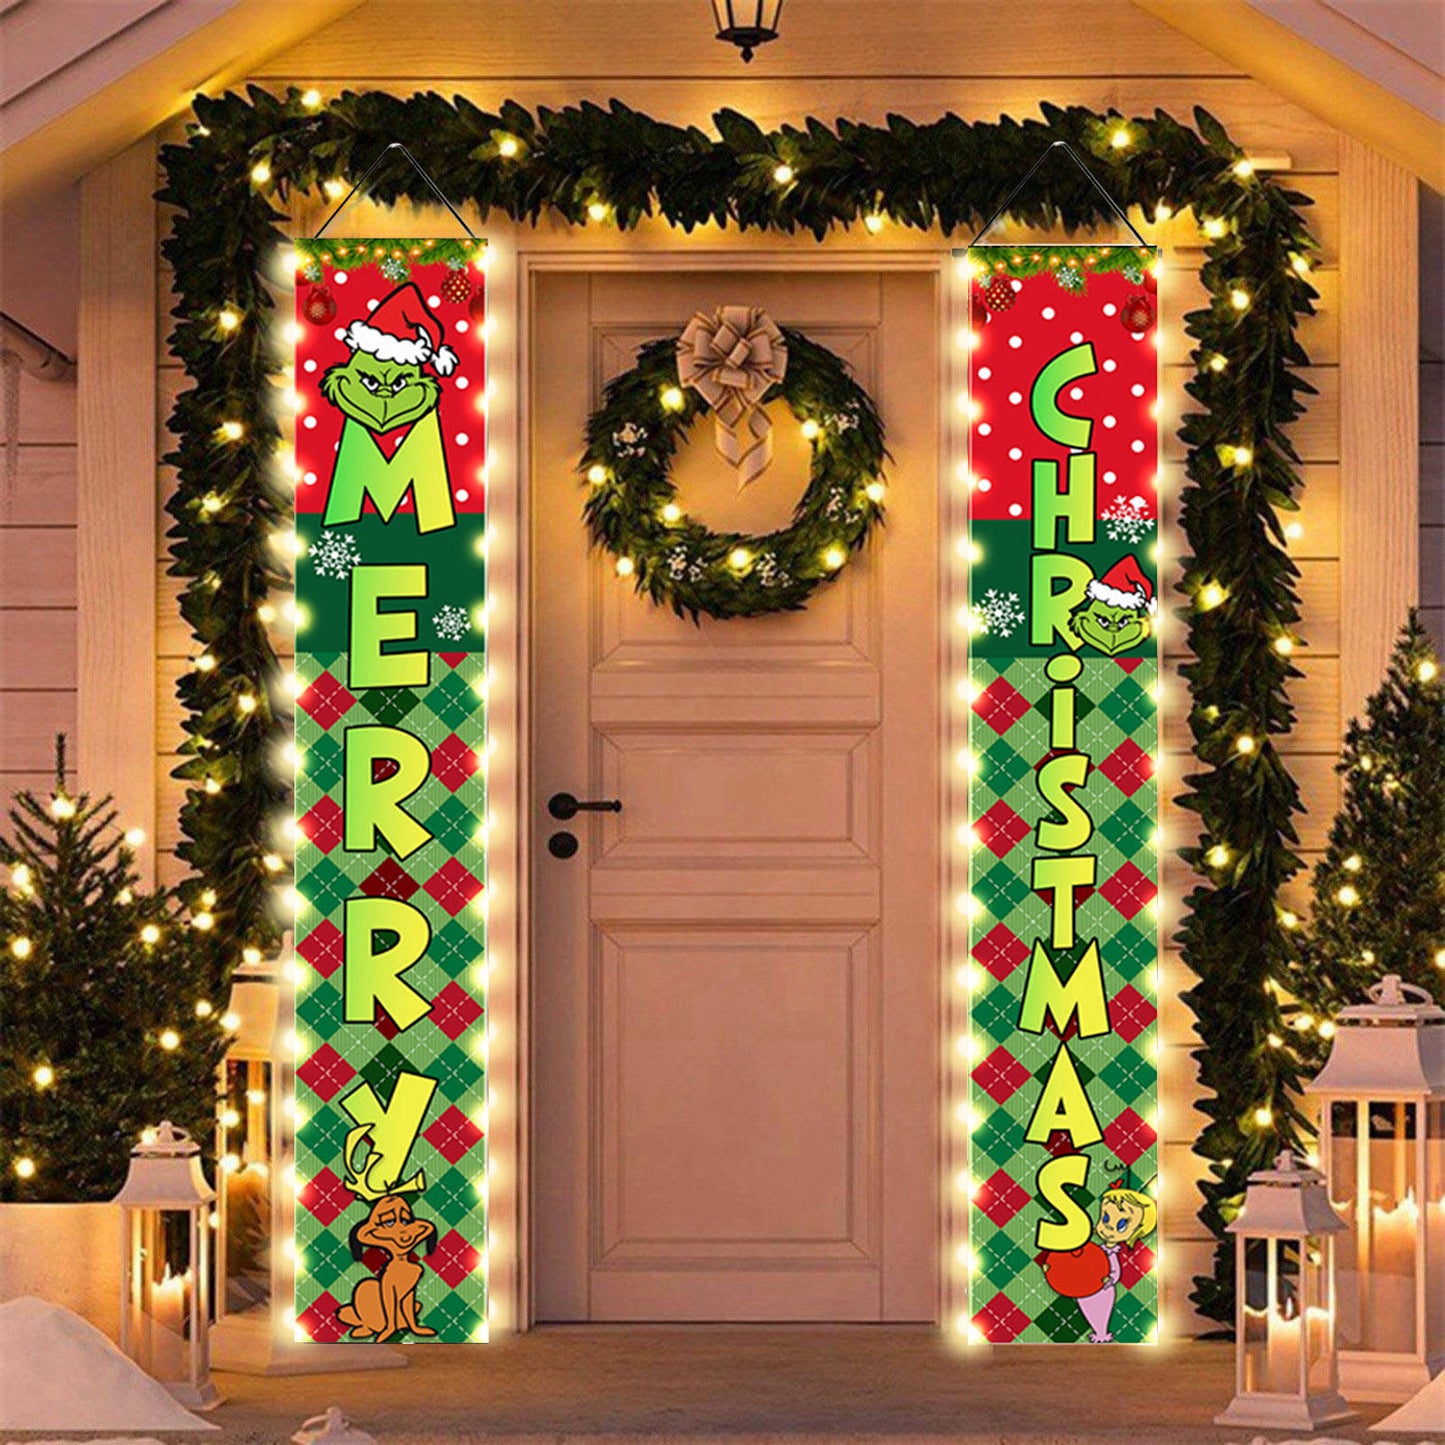 Christmas decorations, Christmas porch sign with colored lights, Christmas door banner